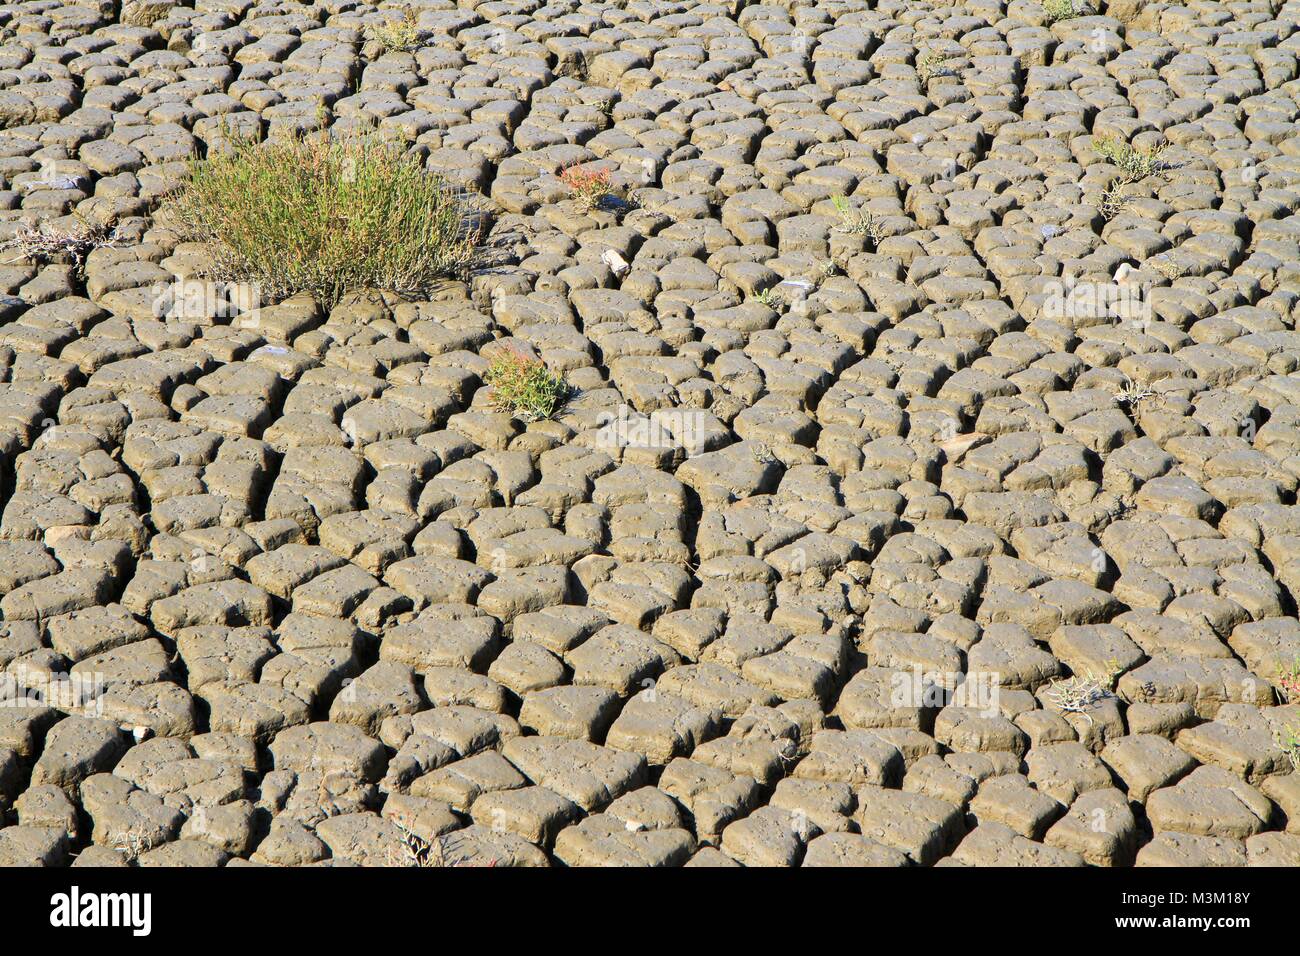 Cracked dry mud in Camargue, Provence, France Stock Photo